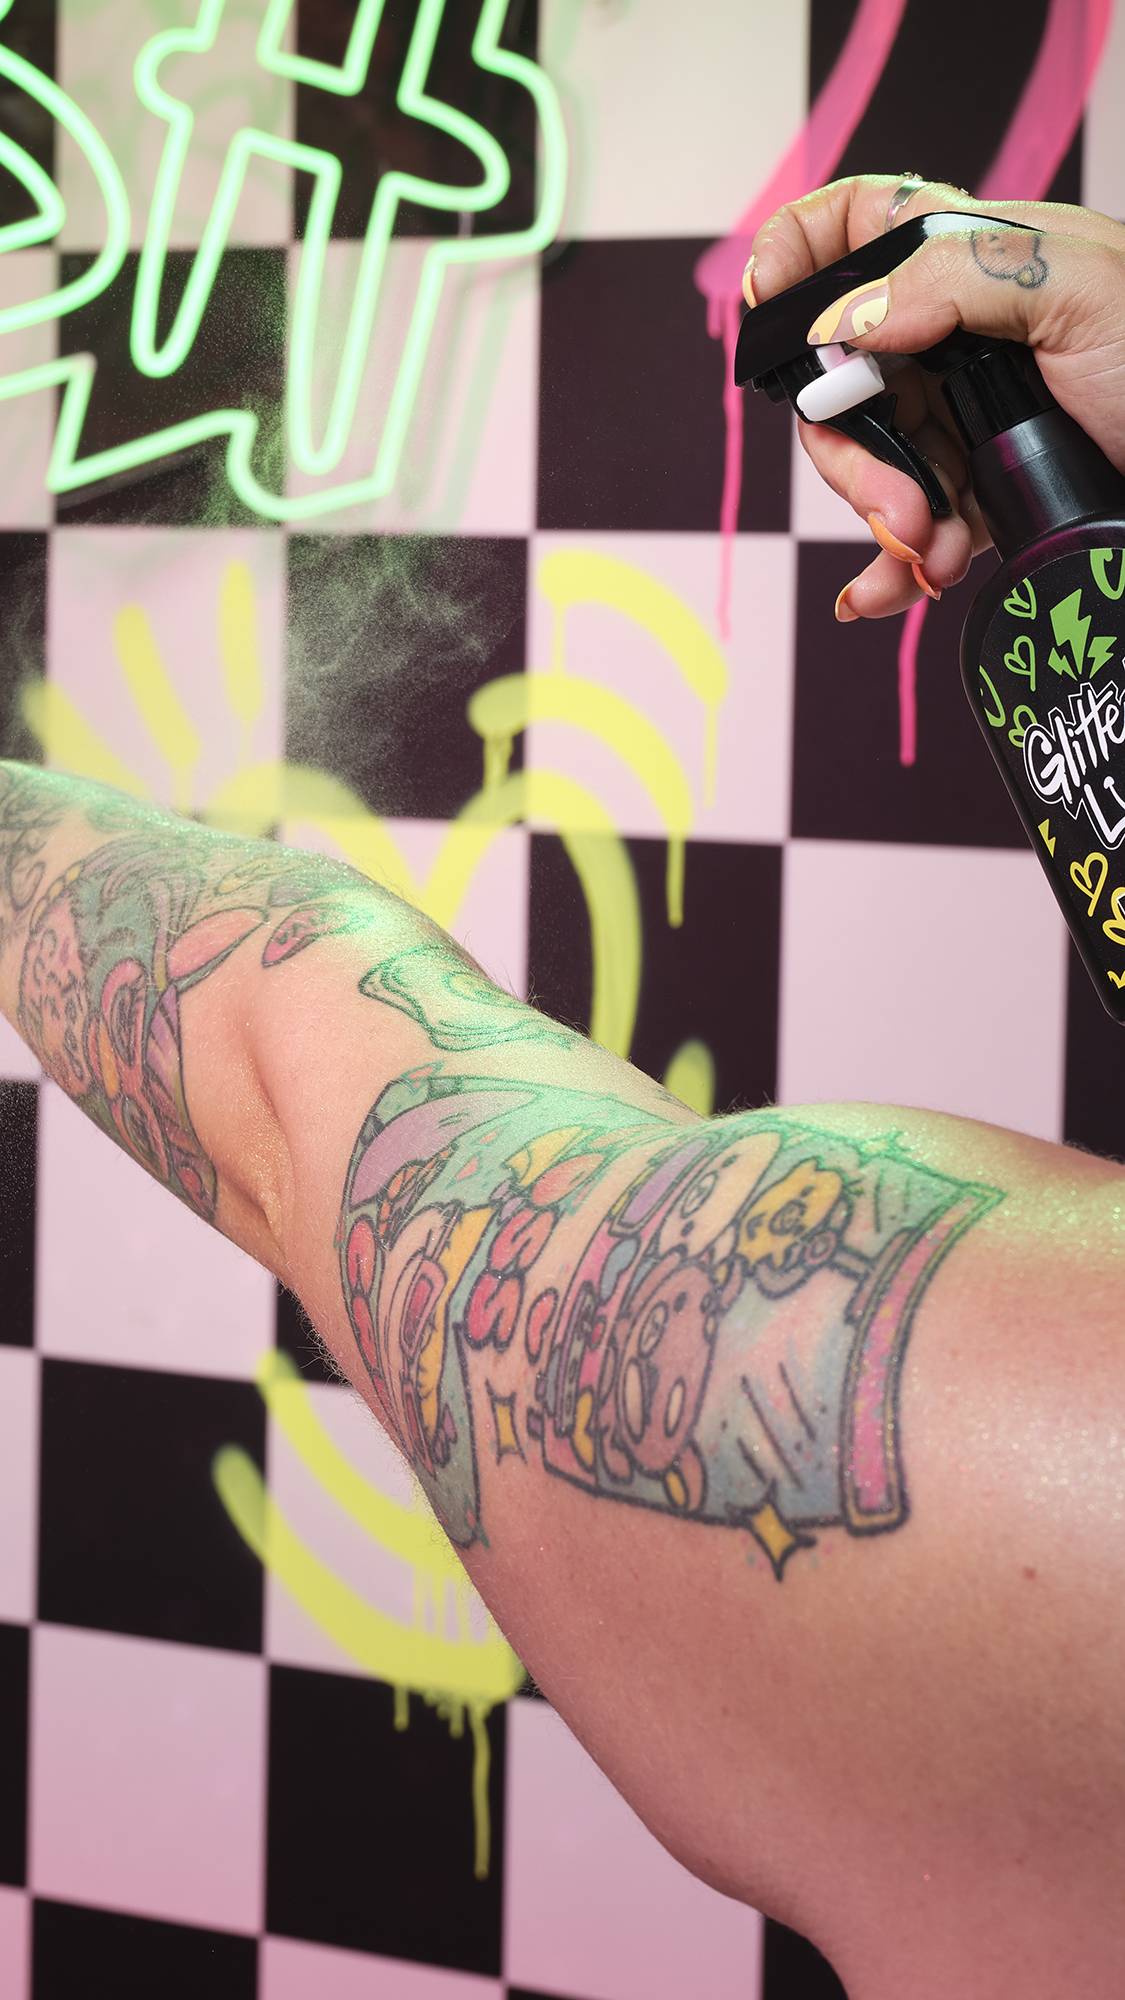 A close-up of the model spritzing the body spray on their arm in front of a checkered wall with neon graffiti.